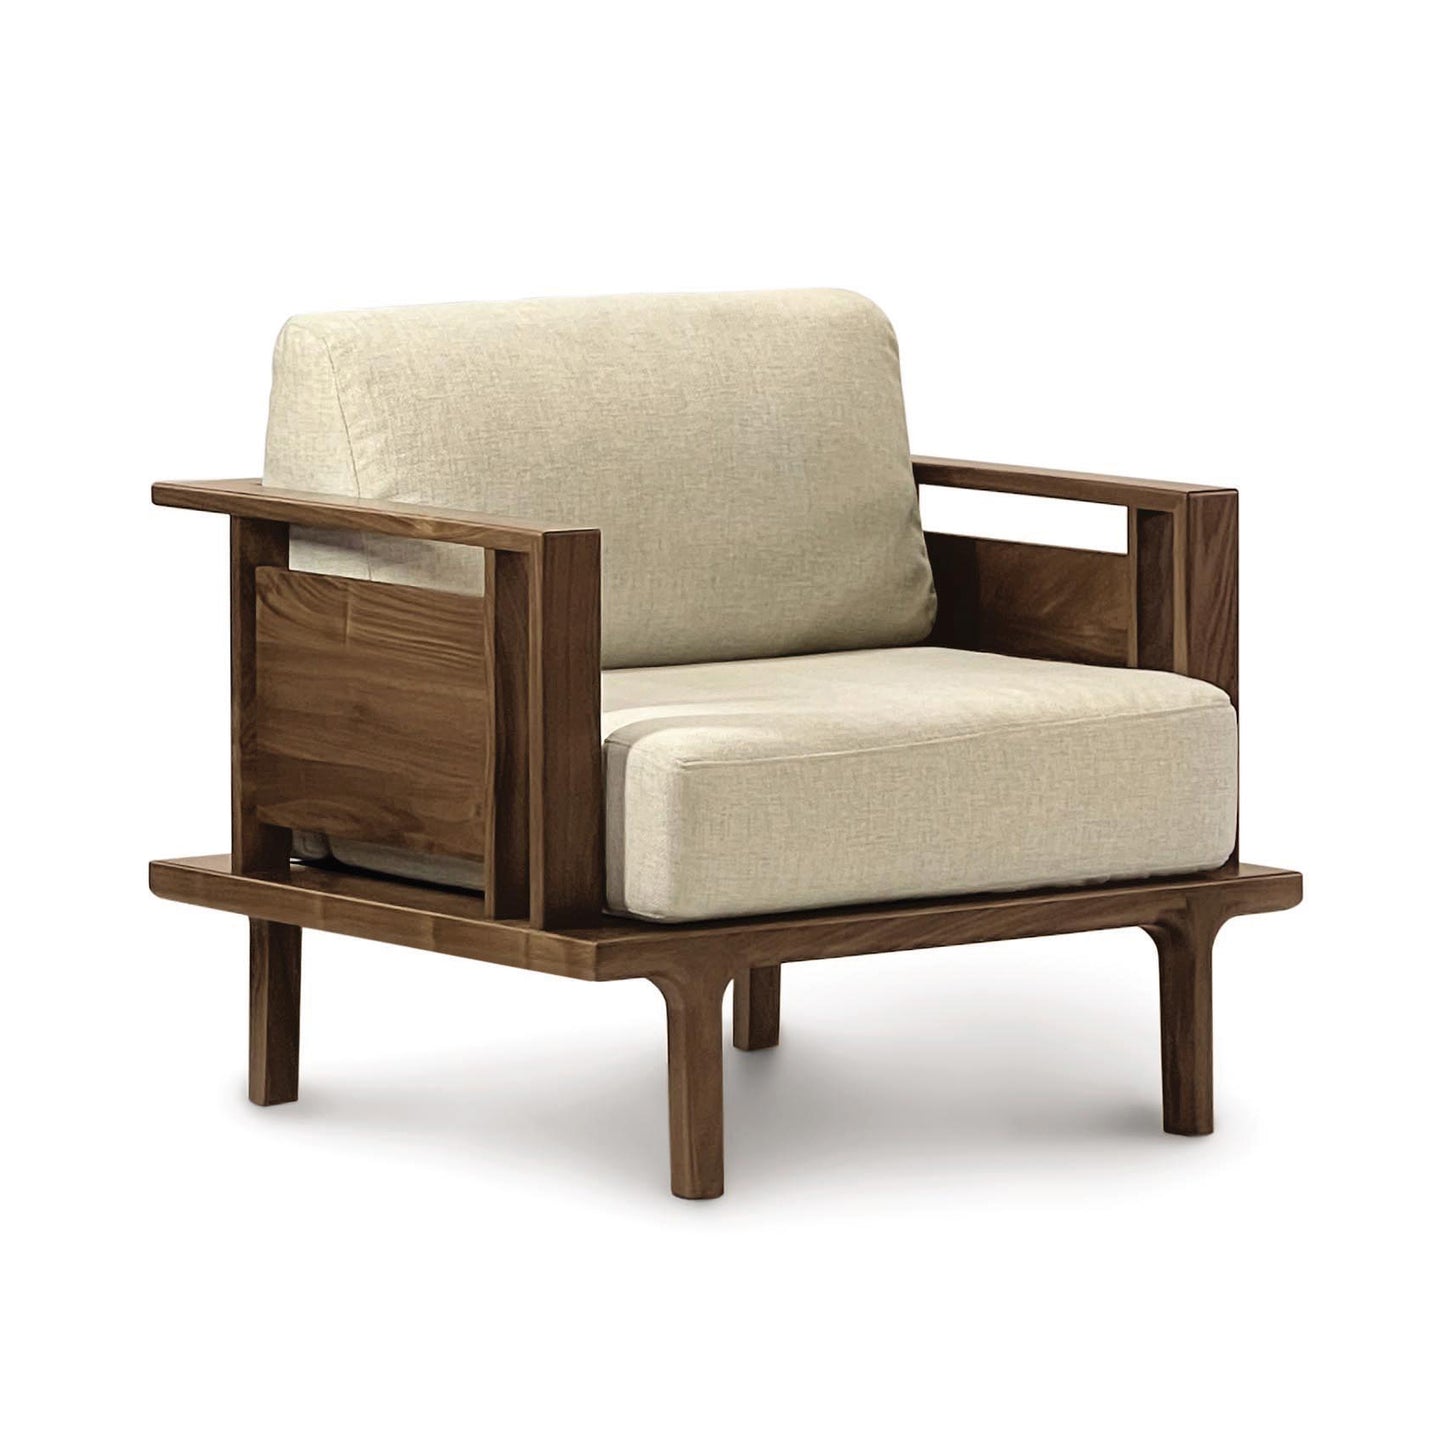 A Sierra Walnut Upholstered Chair from Copeland Furniture, with custom upholstery and a beige cushion.